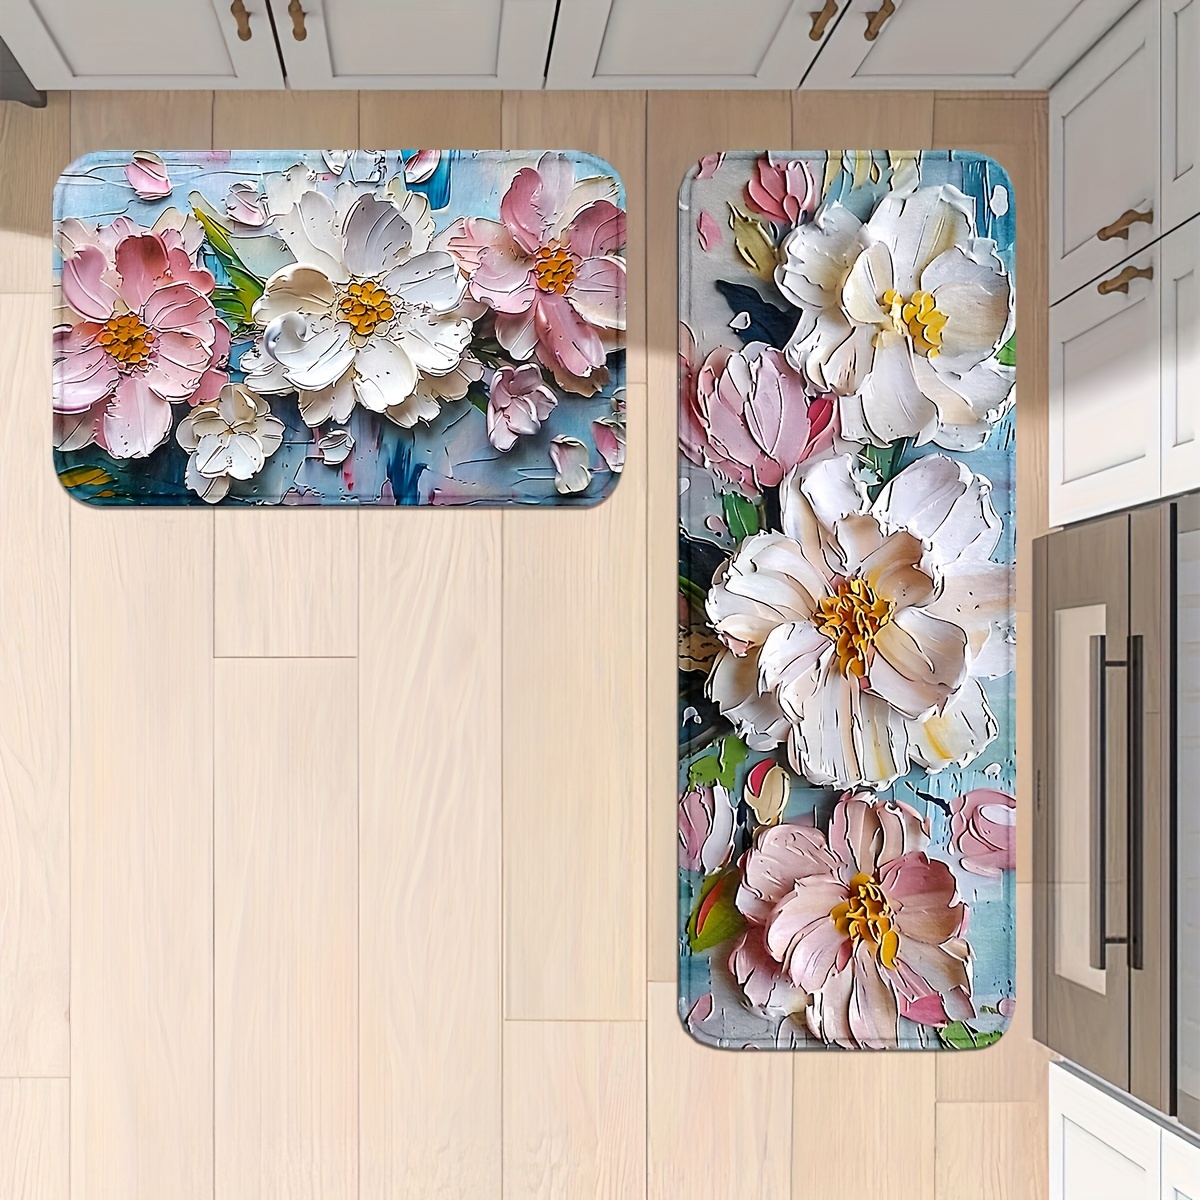 

Floral Non-slip Kitchen & Bathroom Mats - Durable, Machine Washable Runner Rugs For Home, Office, Laundry - Comfortable Standing Pads In Various Sizes